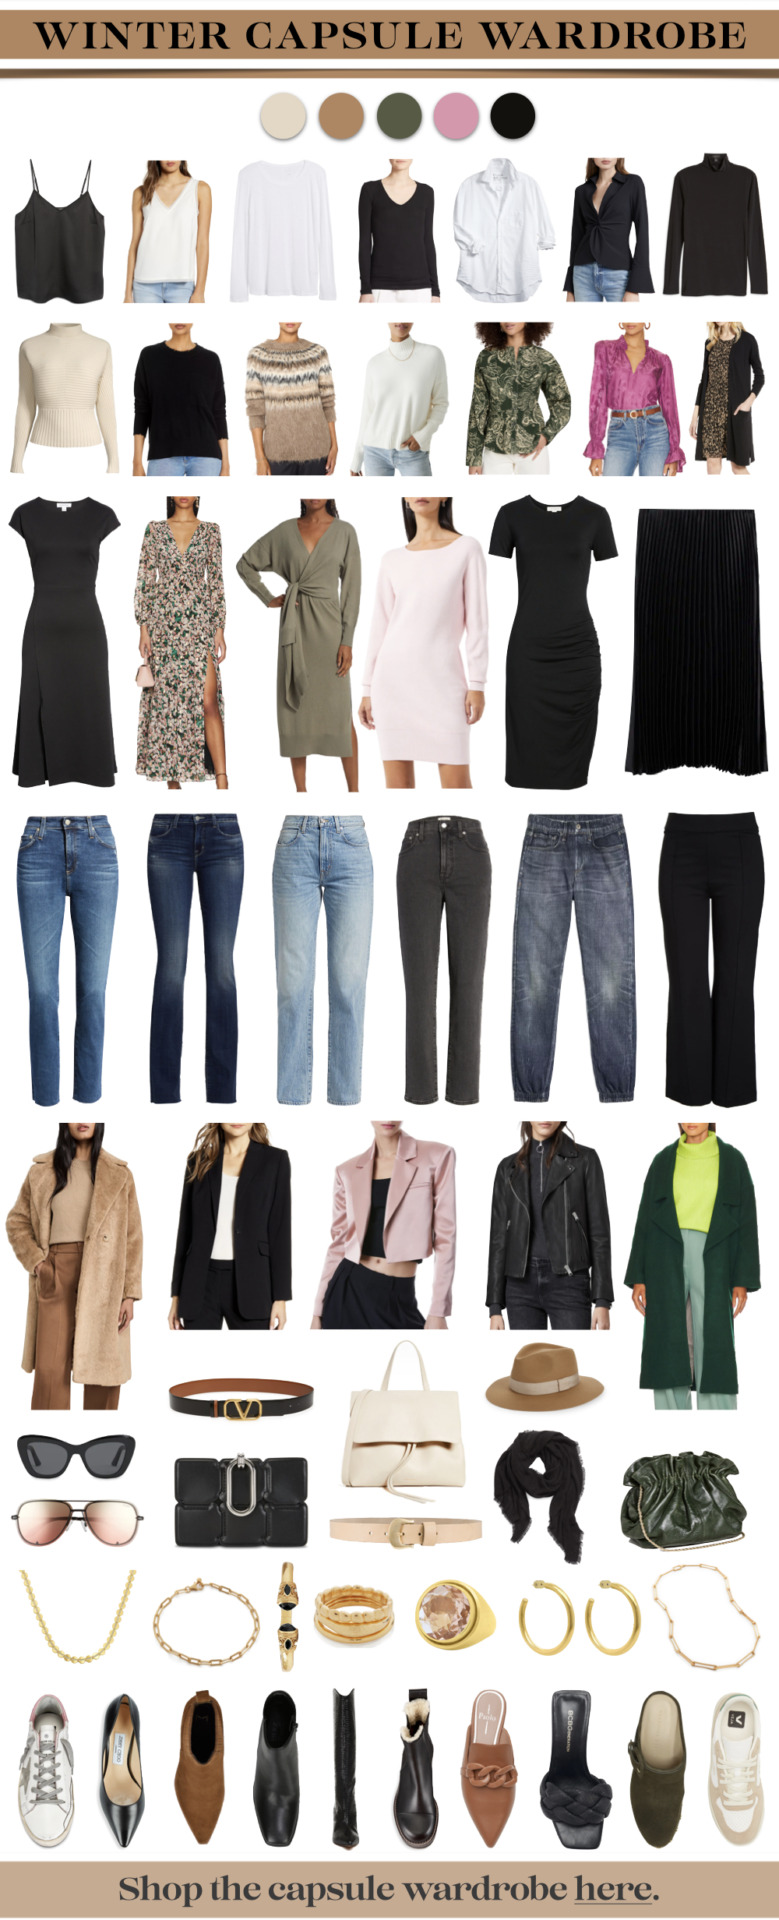 capsule wardrobe, winter wardrobe basics, winter wardrobe basics, must have wardrobe basics, erin busbee, what to buy for winter, fall outfits, winter outfits, spring outfits, wardrobe basics, winter capsule wardrobe